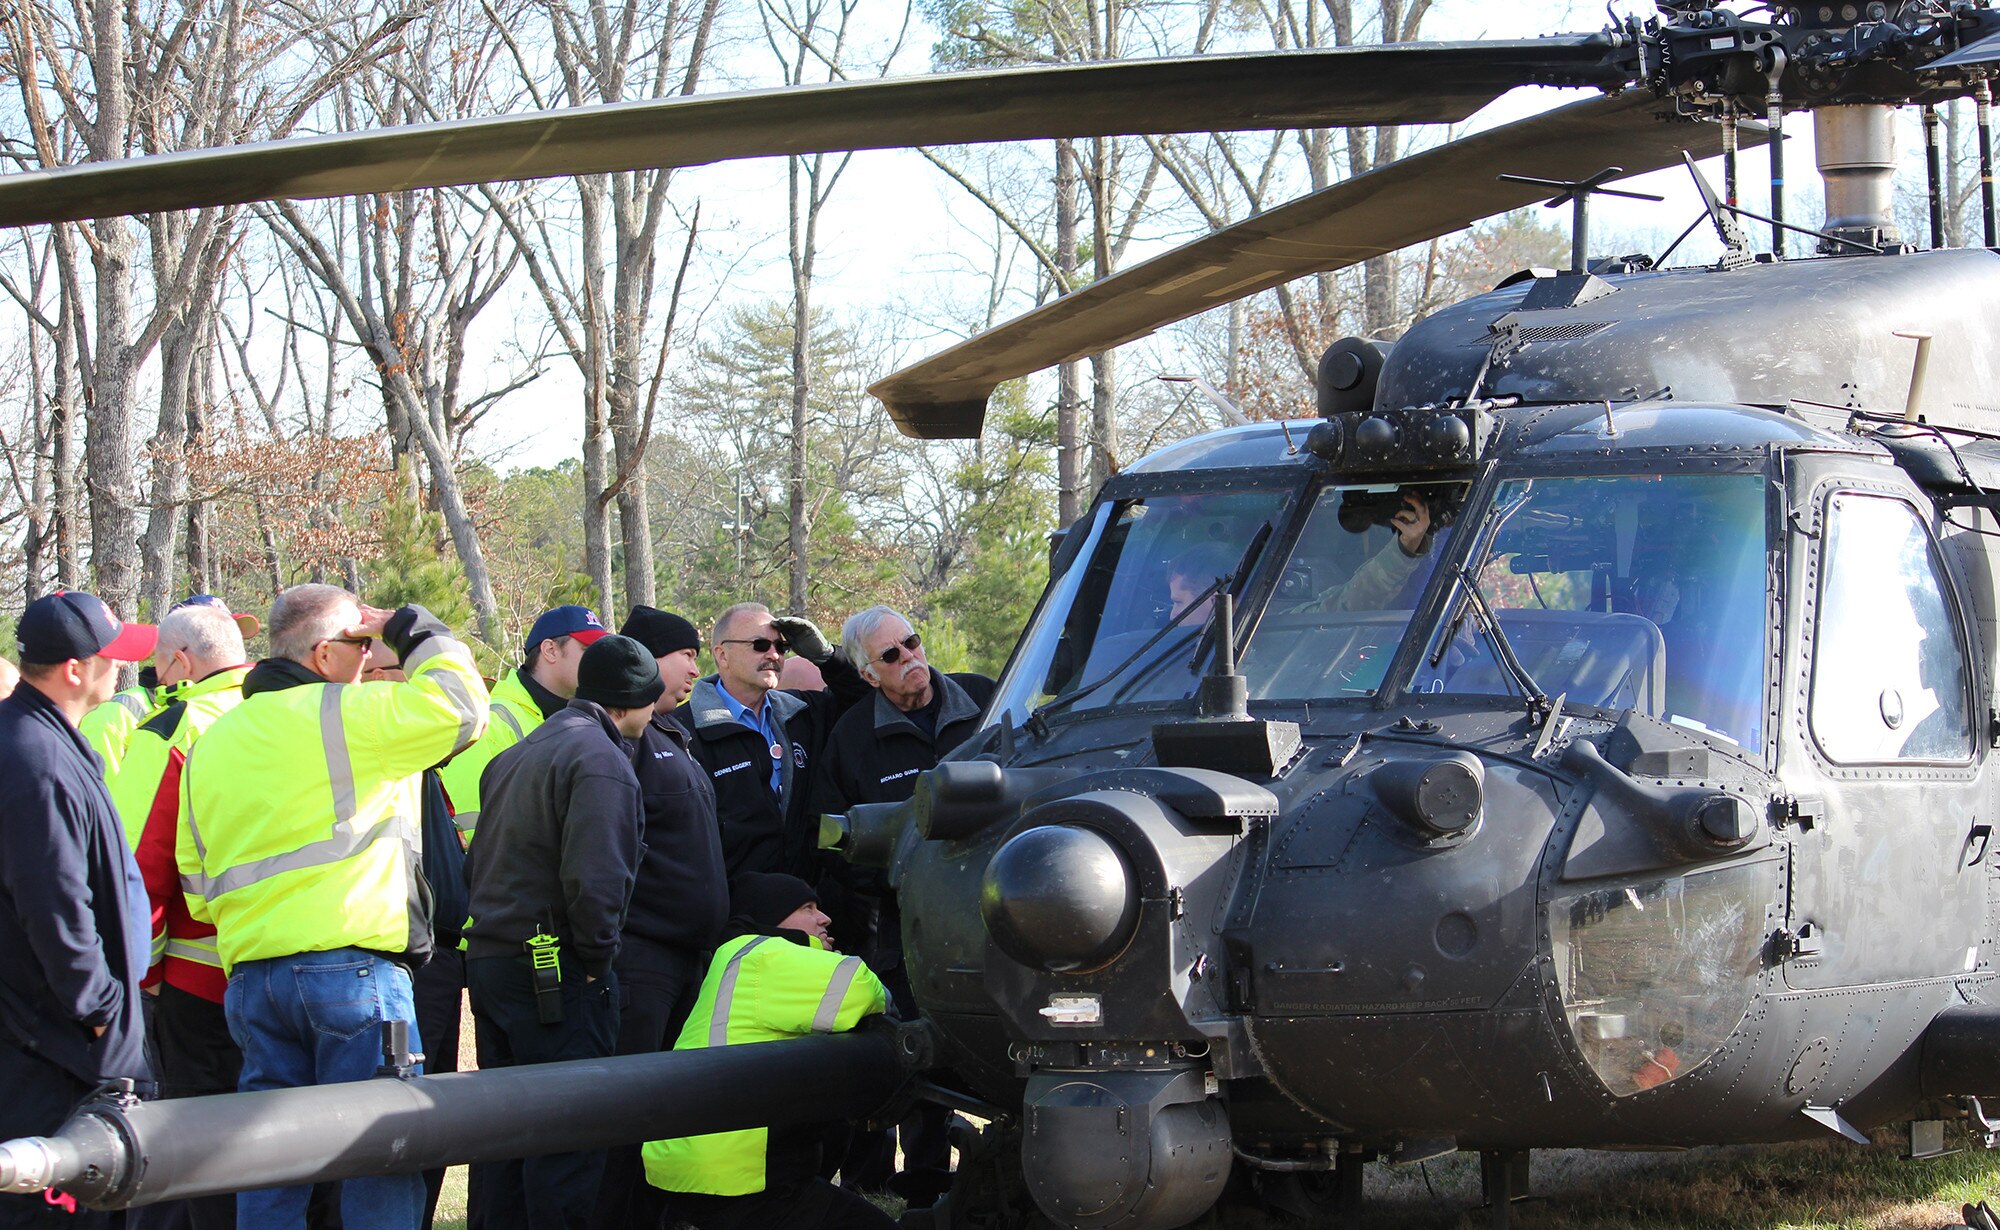 Arnold Air Force Base Fire and Emergency Services personnel listen as a member of a U.S. Army unit based at Fort Campbell, Kentucky, describes the equipment inside the helicopter as part of a training exercise Dec. 20, 2019, at Arnold Air Force Base. The training is meant to familiarize the FES personnel with the working parts of different military helicopters should they ever be called to assist in an emergency involving such aircraft. (U.S. Air Force photo by Deidre Moon)